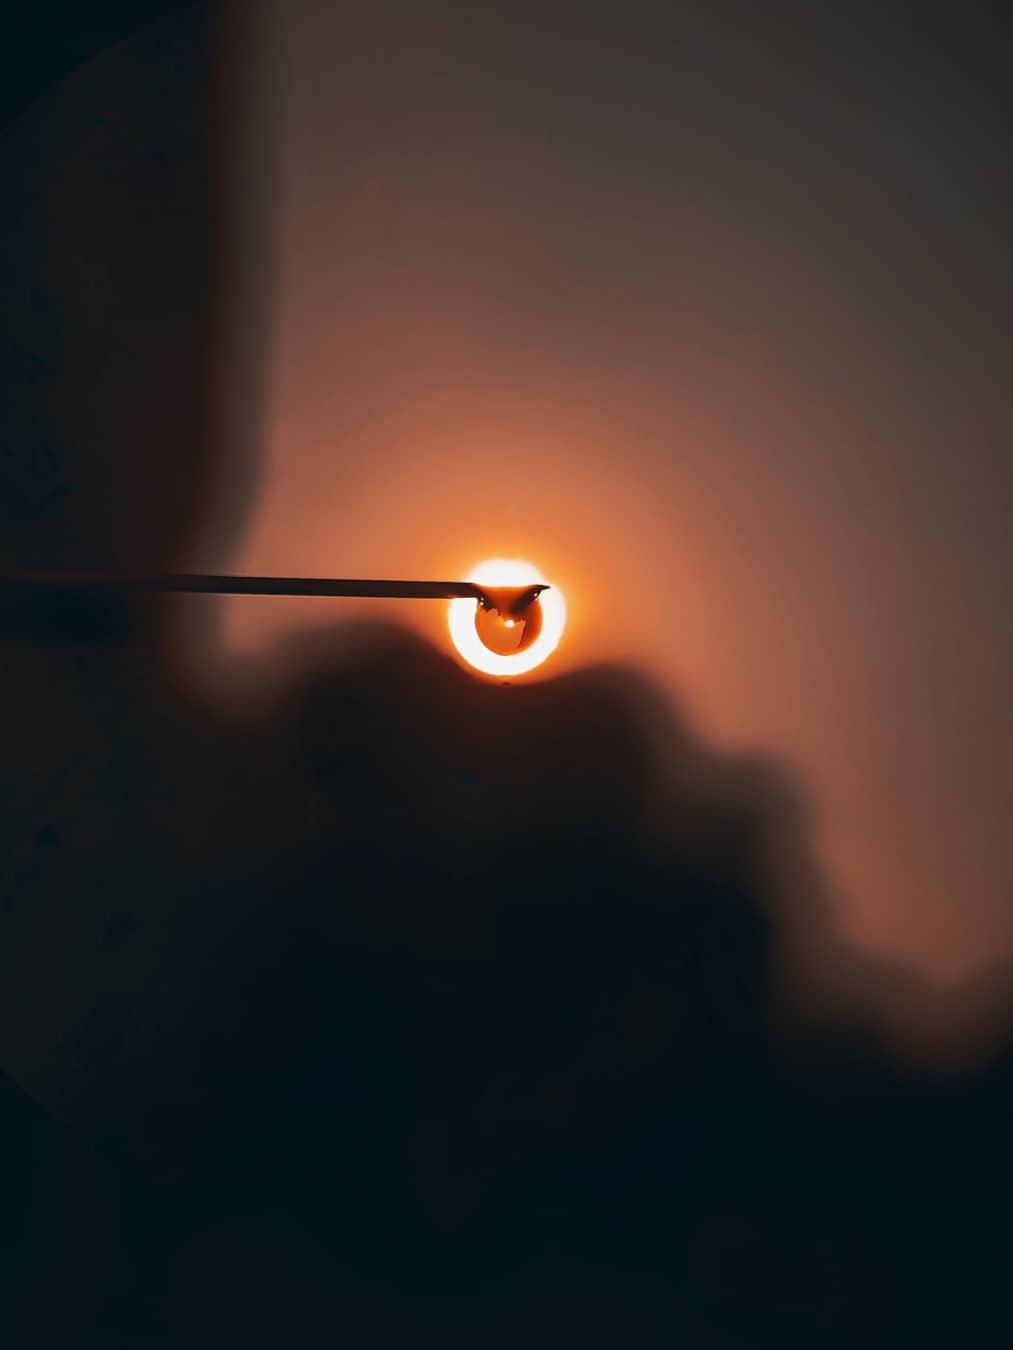 Sunset through a water droplet